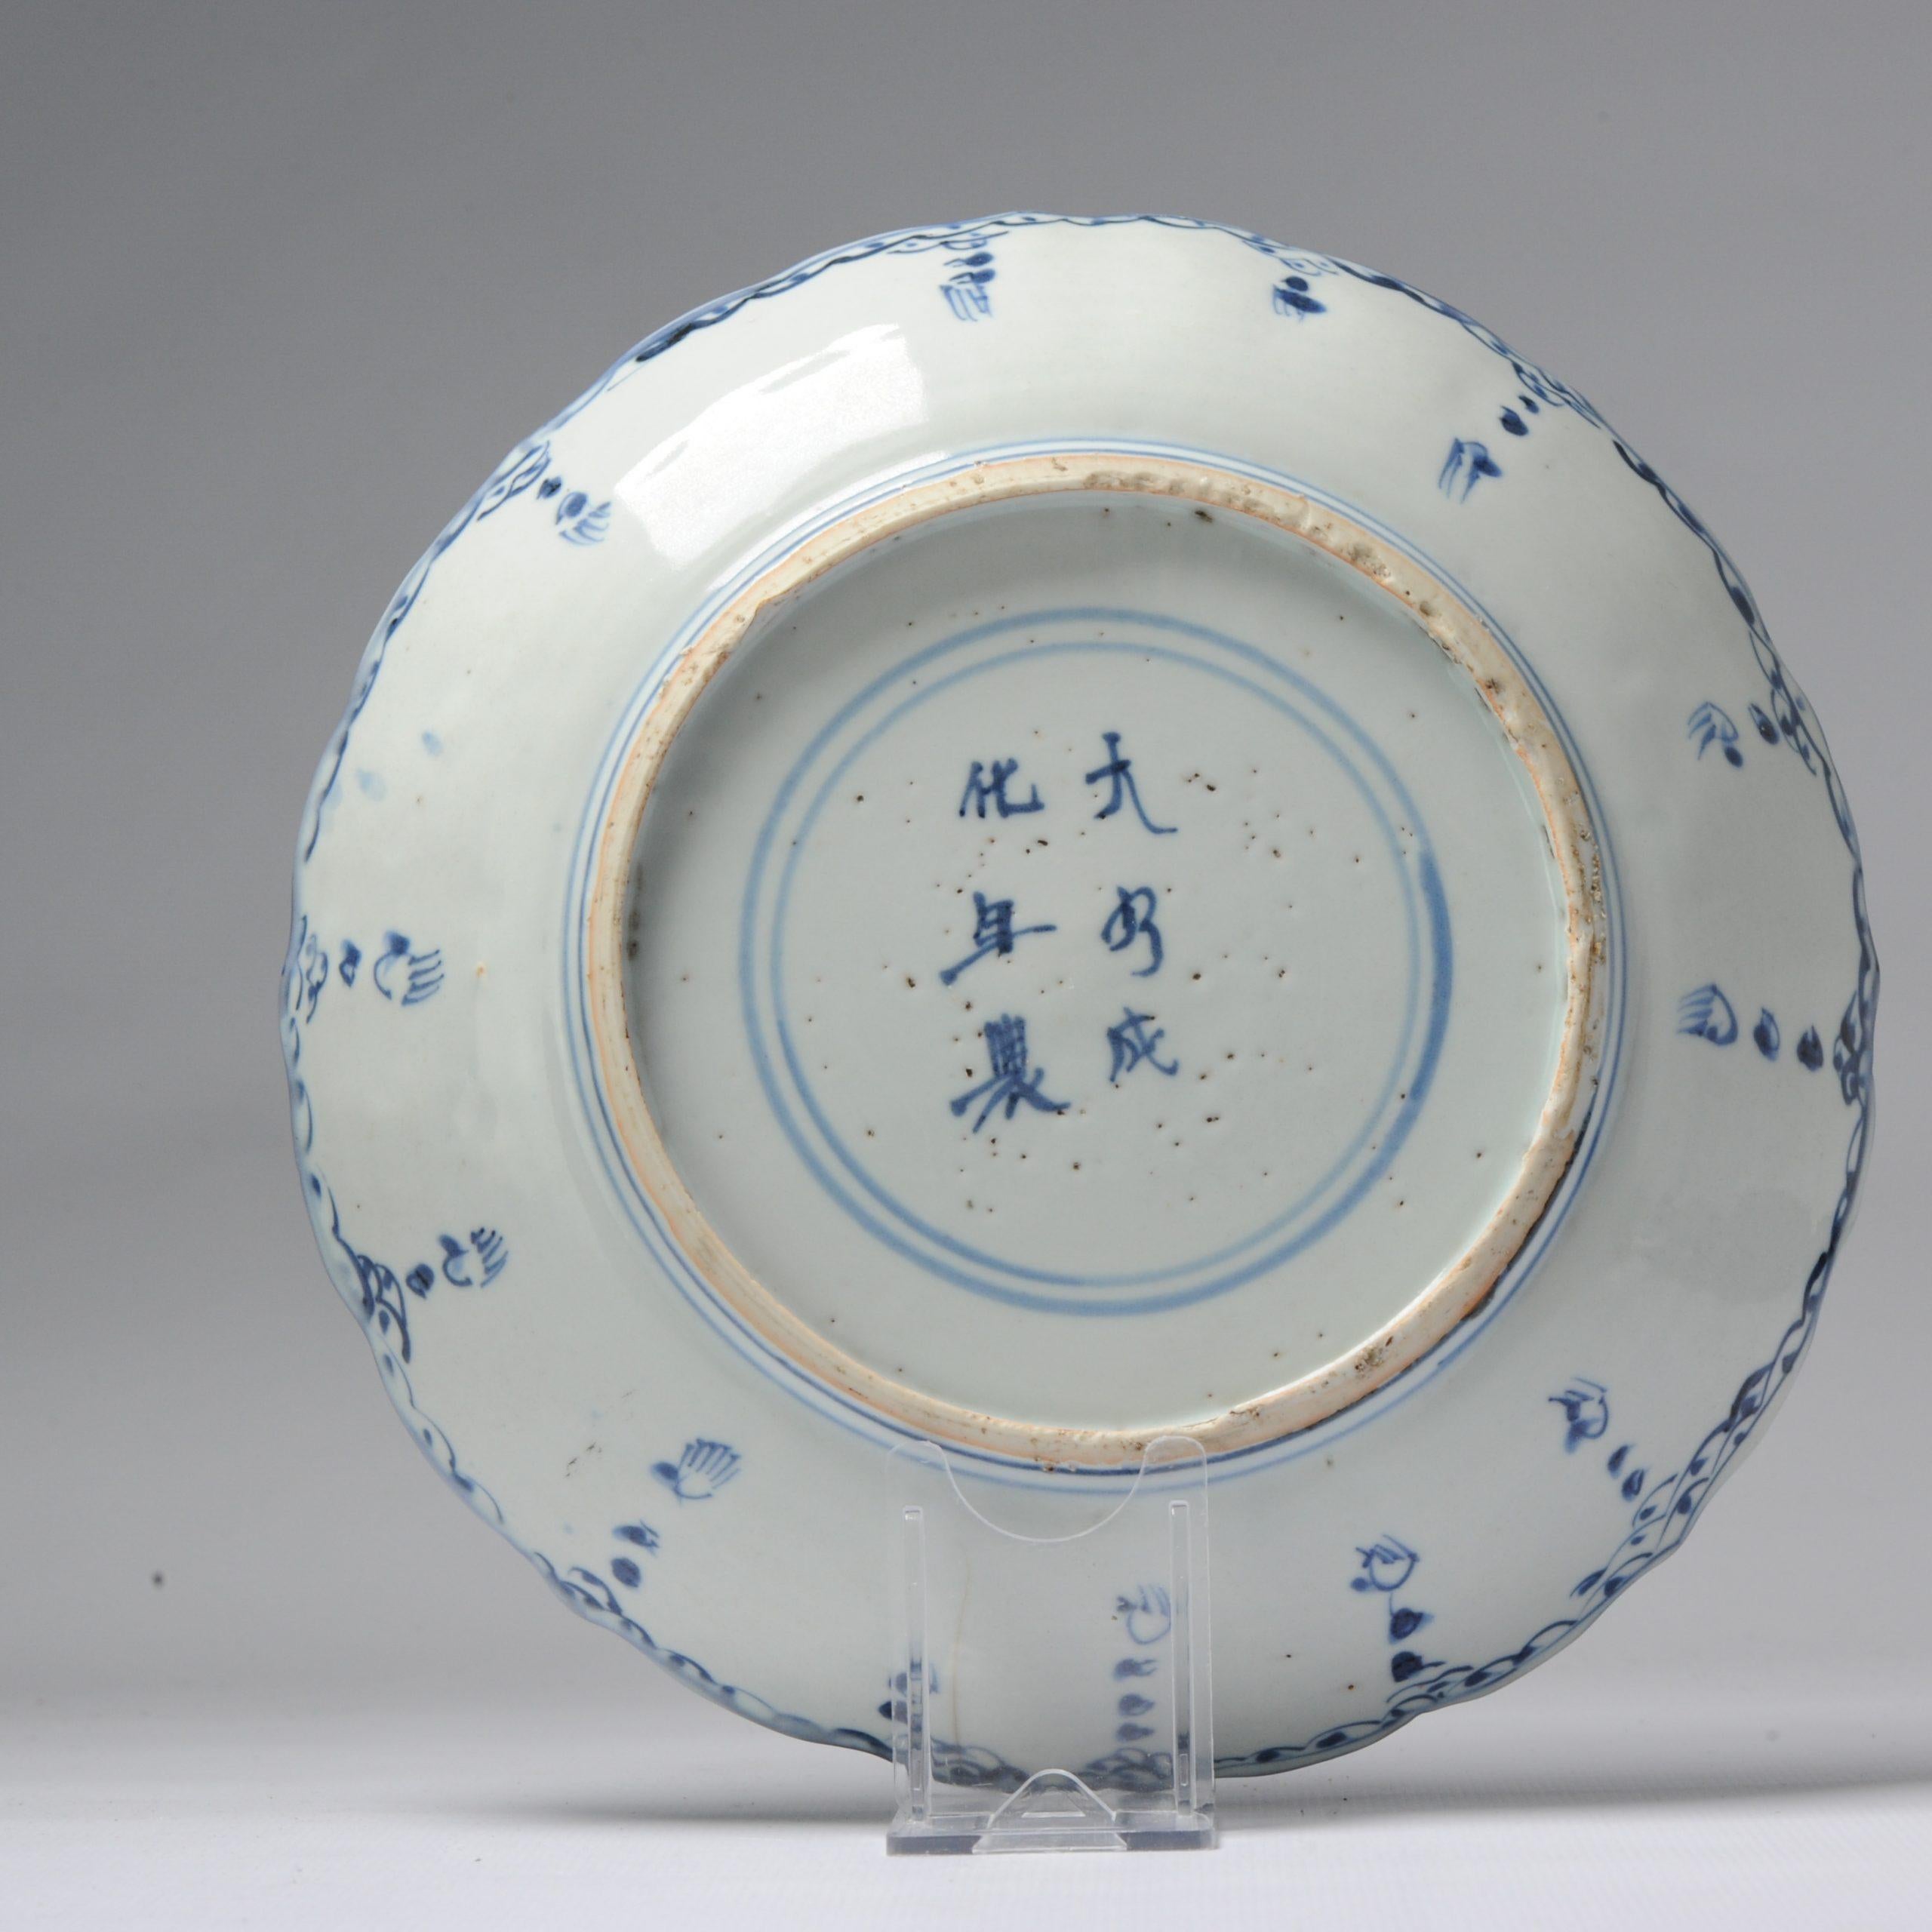 Antique Chinese 17th C Wanli Ming Dynasty Plate Dish Porcelain Chenghua Marked For Sale 7